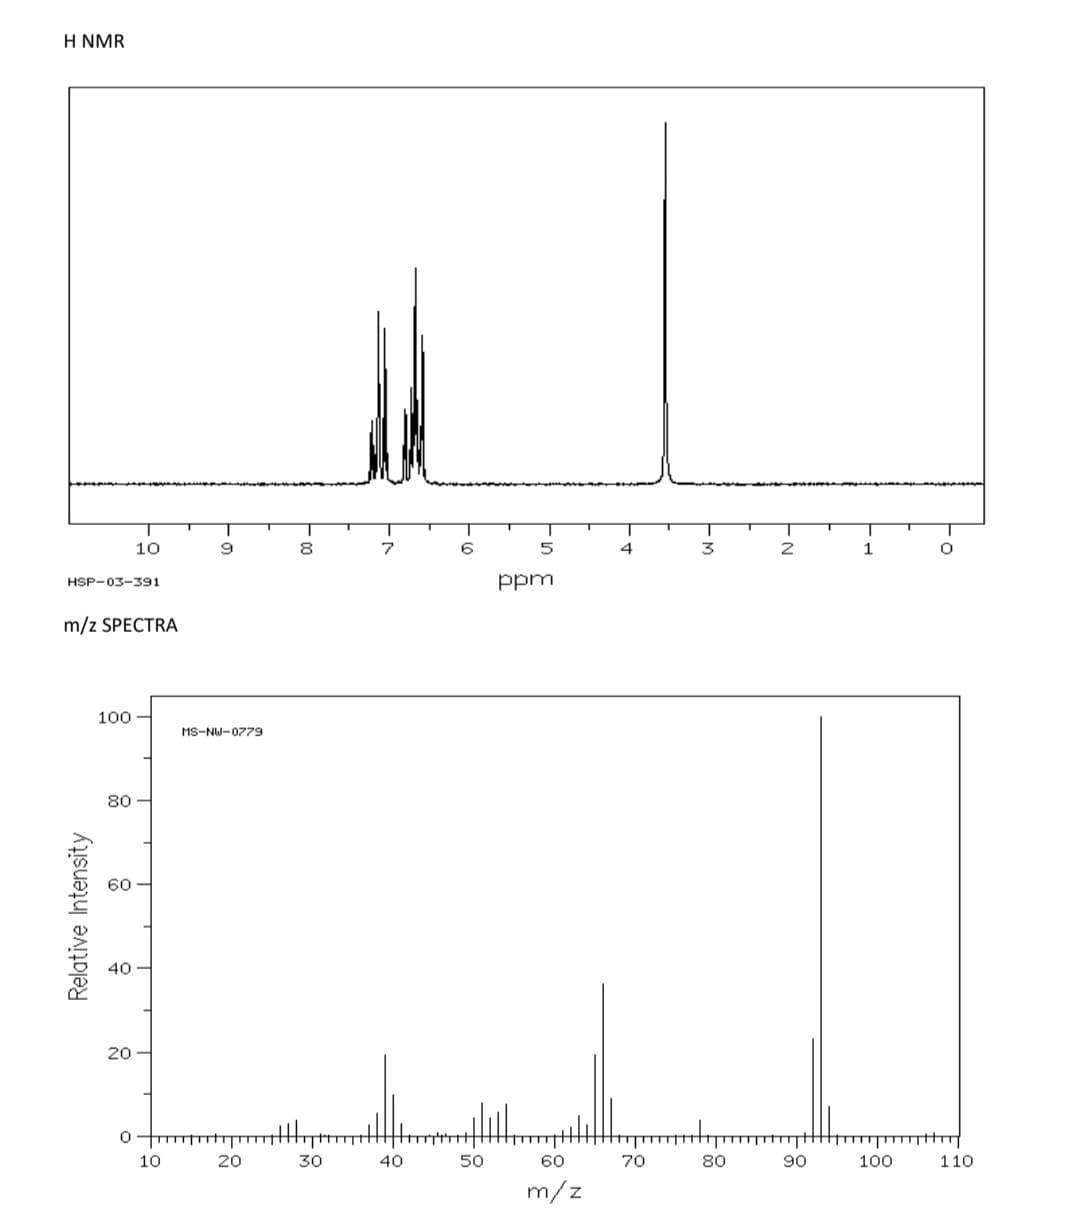 H NMR
10
8
4.
3
HSP-03-391
ppm
m/z SPECTRA
100
MS-NW-0779
80
40
20
10
20
30
40
50
60
70
80
90
100
110
m/z
Relative Intensity
